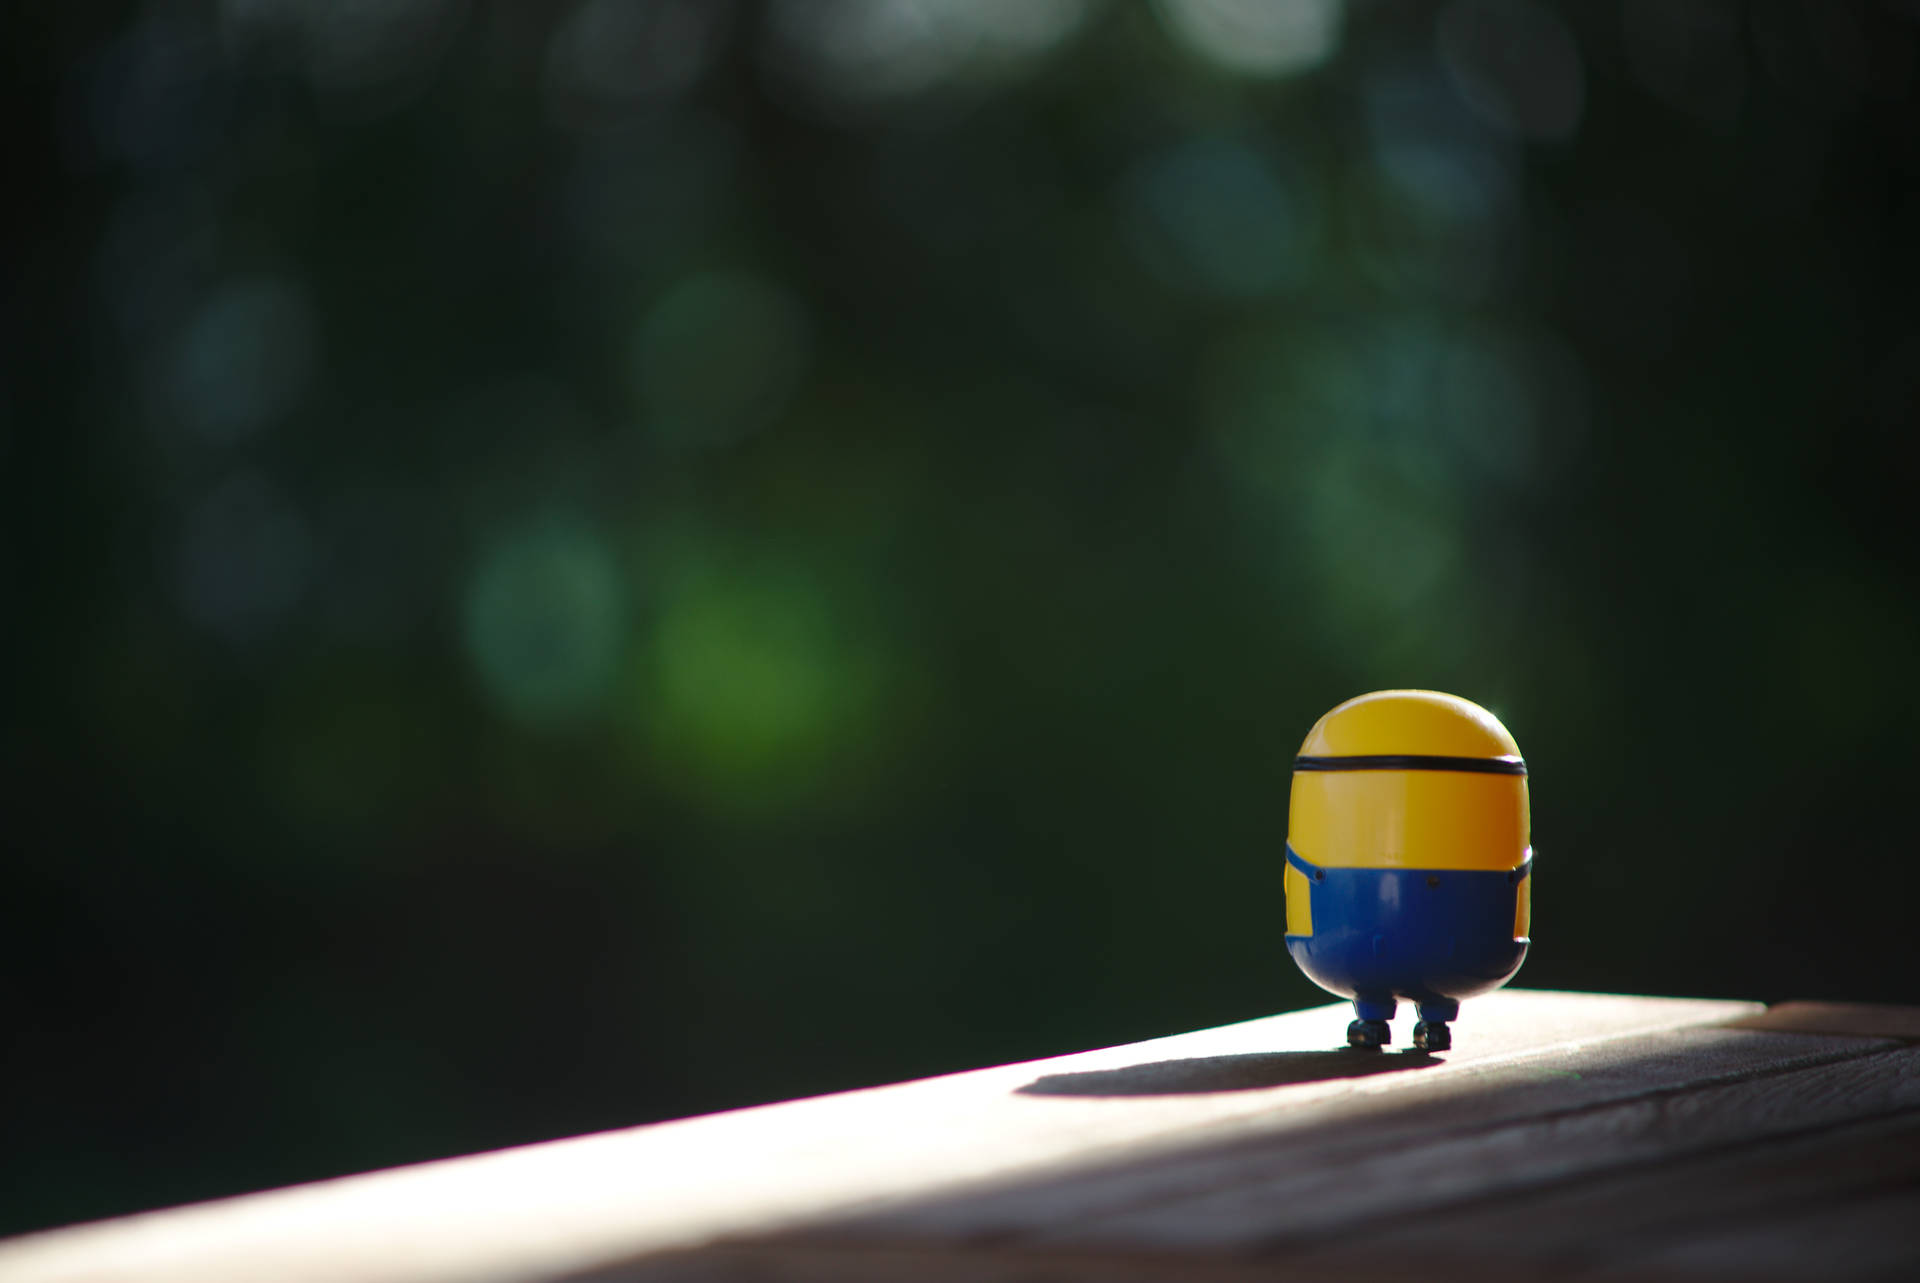 6022X4024 Minions Wallpaper and Background